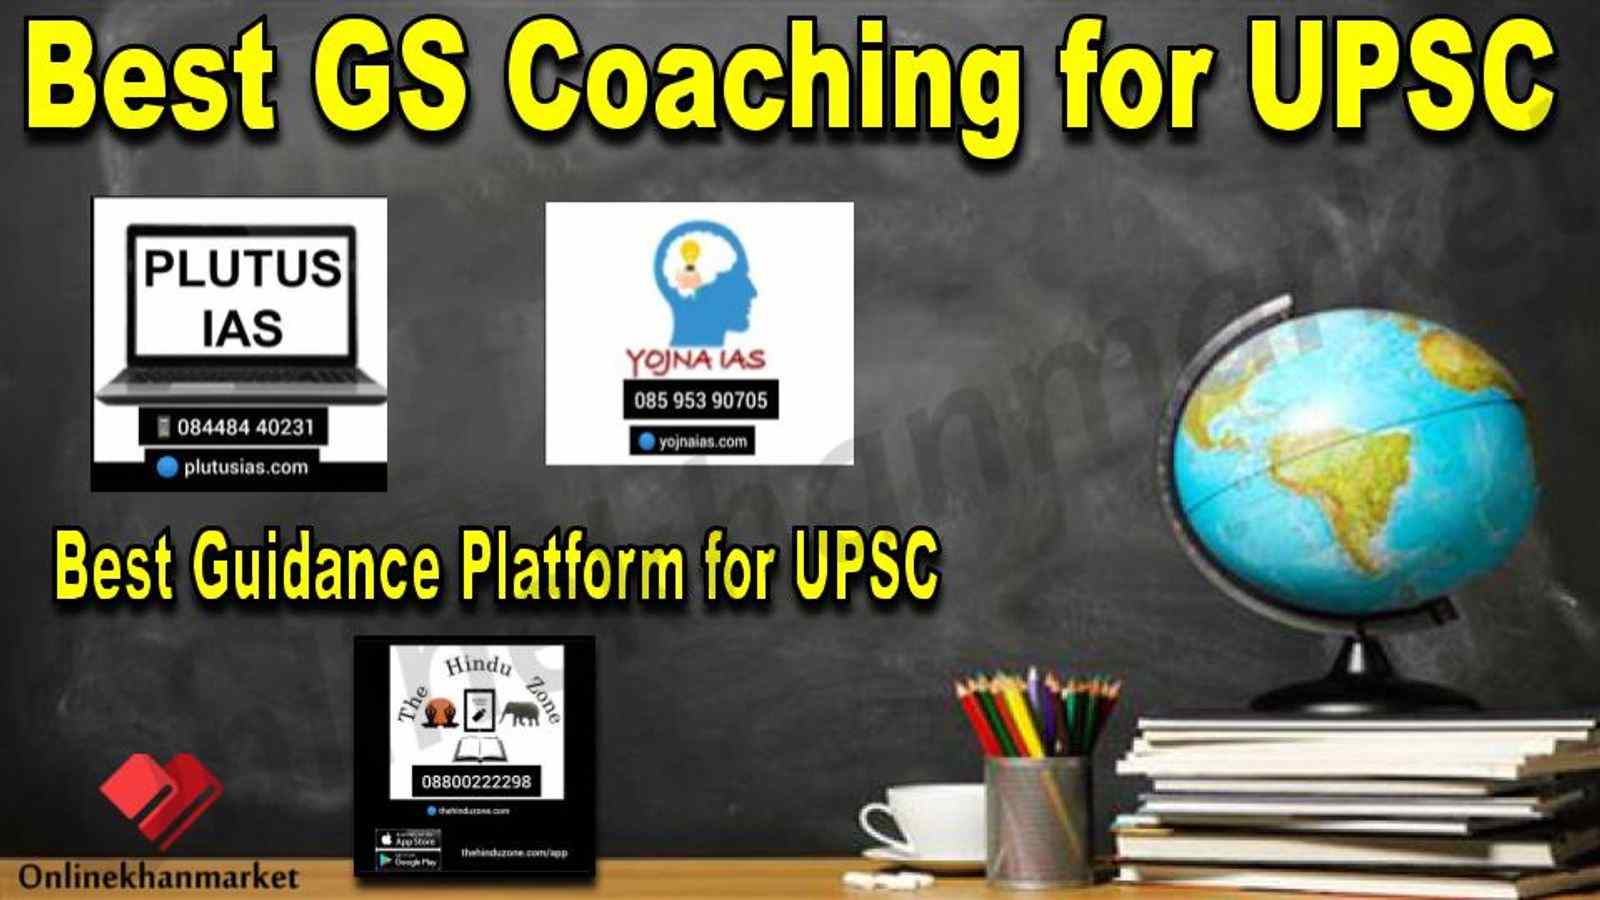 Best GS Coaching for UPSC